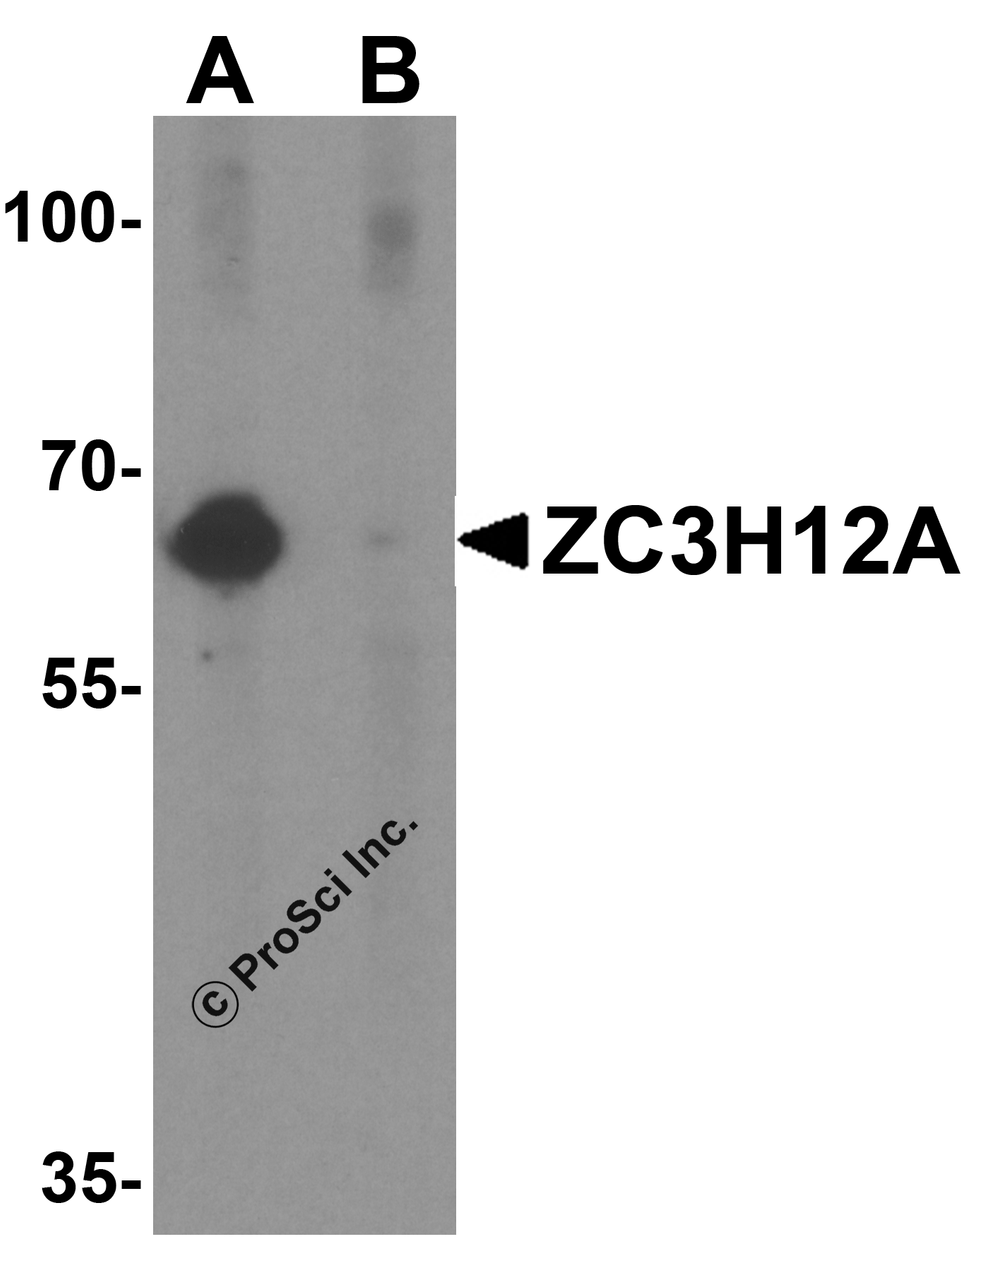 Western blot analysis of ZC3H12A in K562 cell lysate with ZC3H12A antibody at 1 &#956;g/mL in (A) the absence and (B) the presence of blocking peptide.